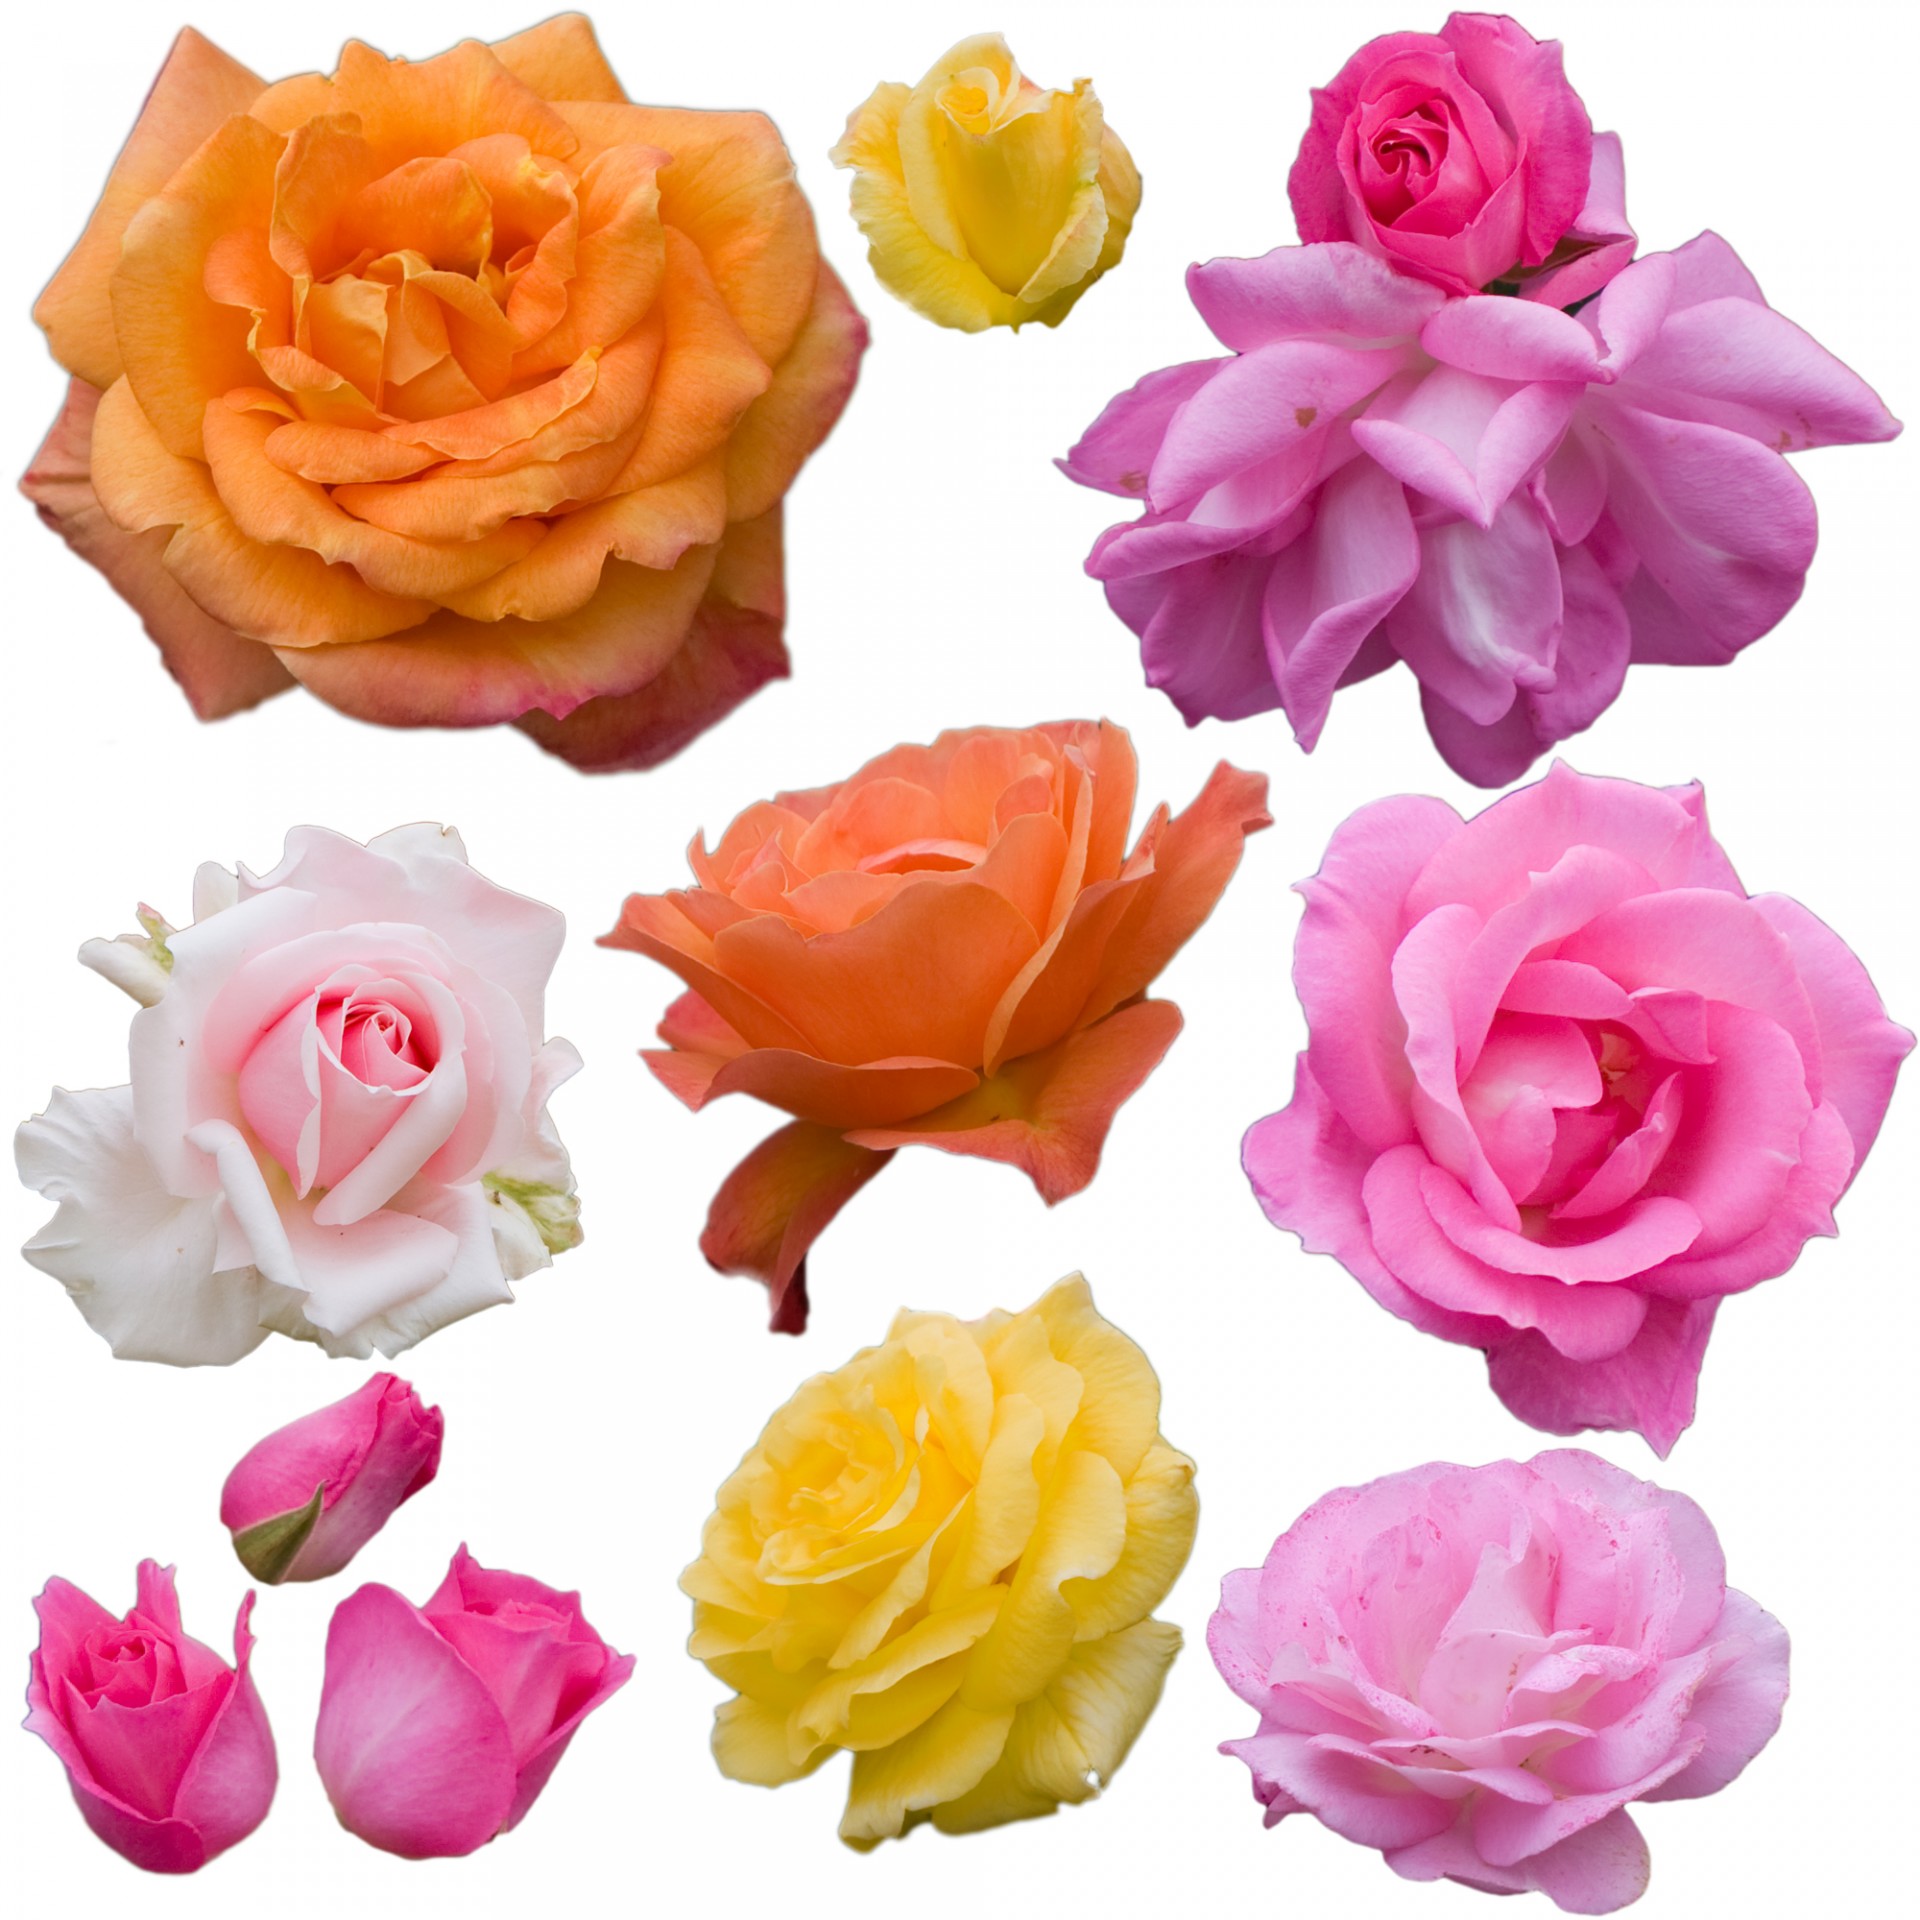 Collection of colorful rose flowers isolated on white background for scrapbooking